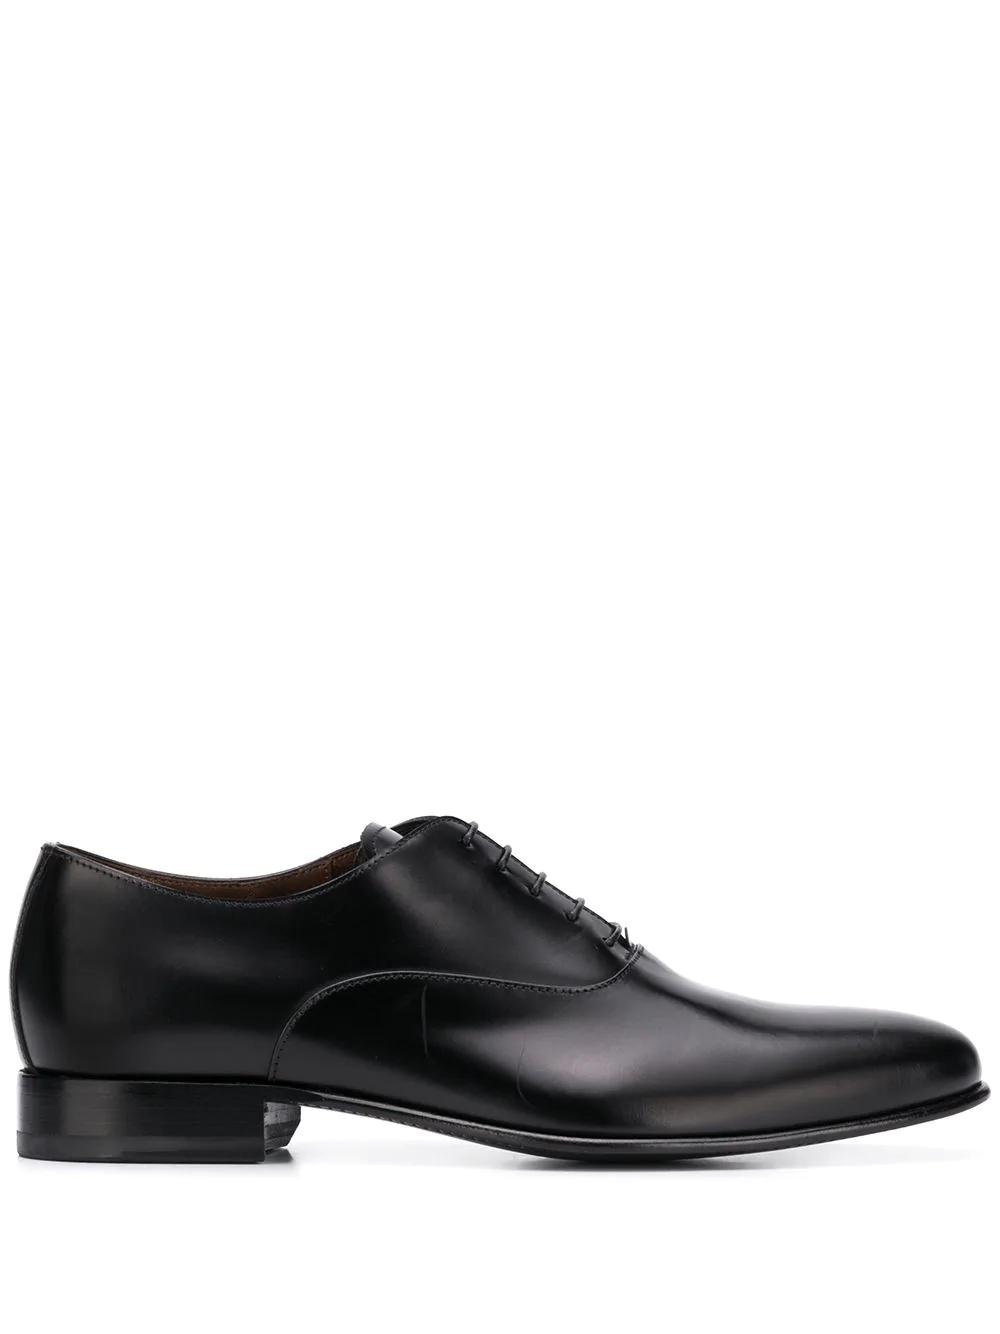 Balloo derby shoes by SCAROSSO